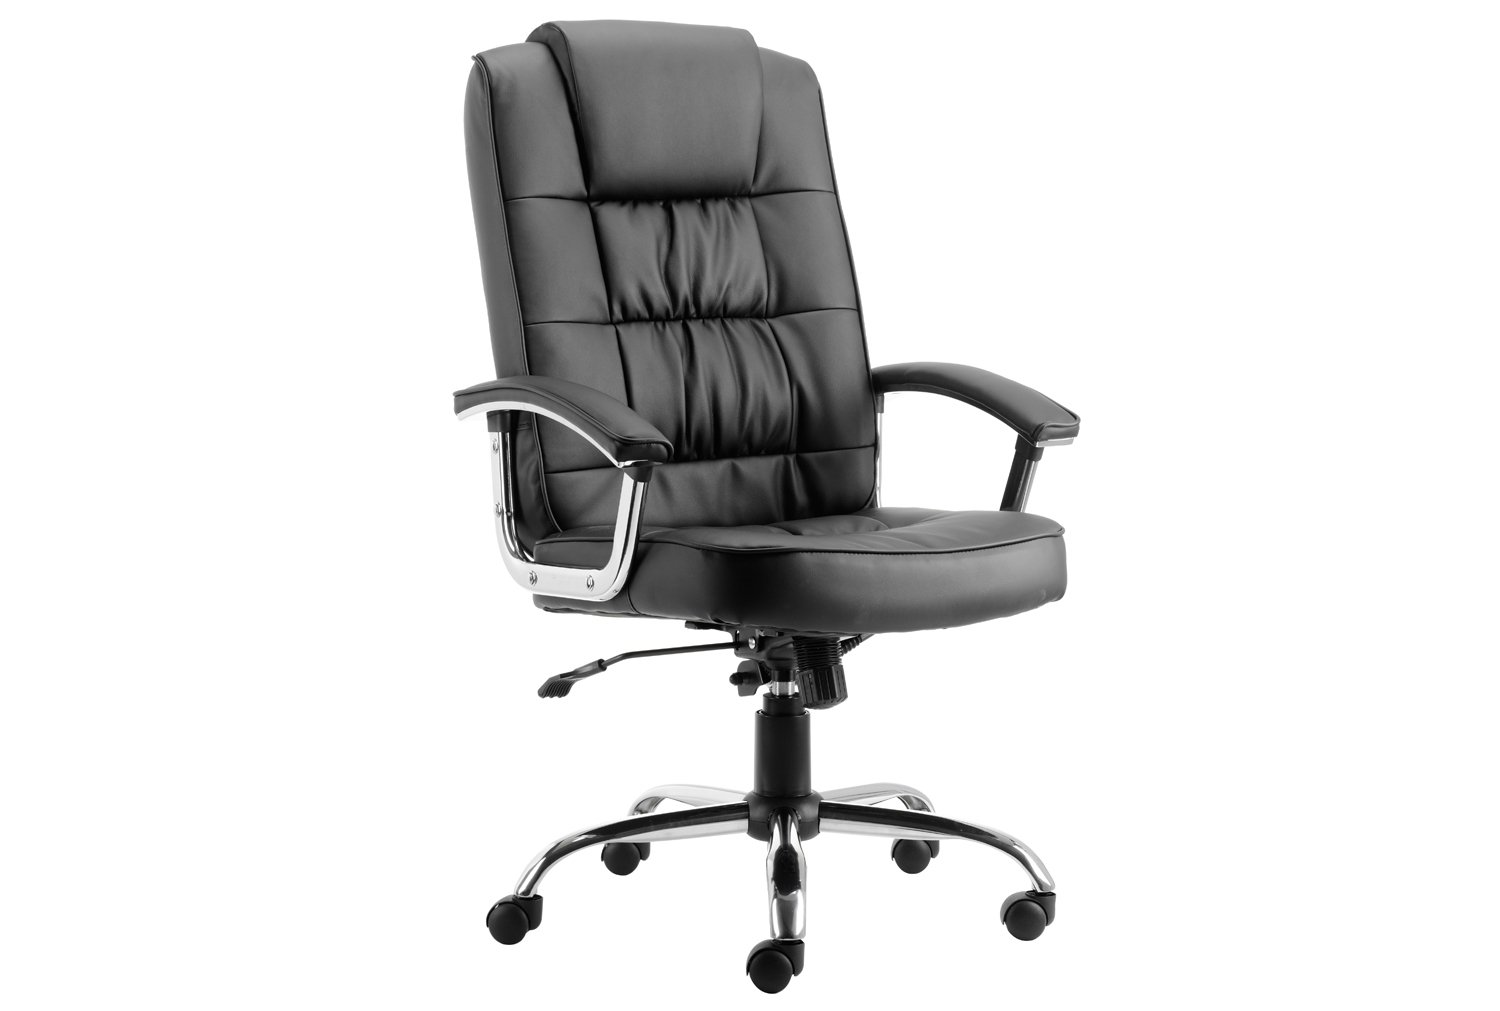 Muscat Deluxe Executive Leather Chair